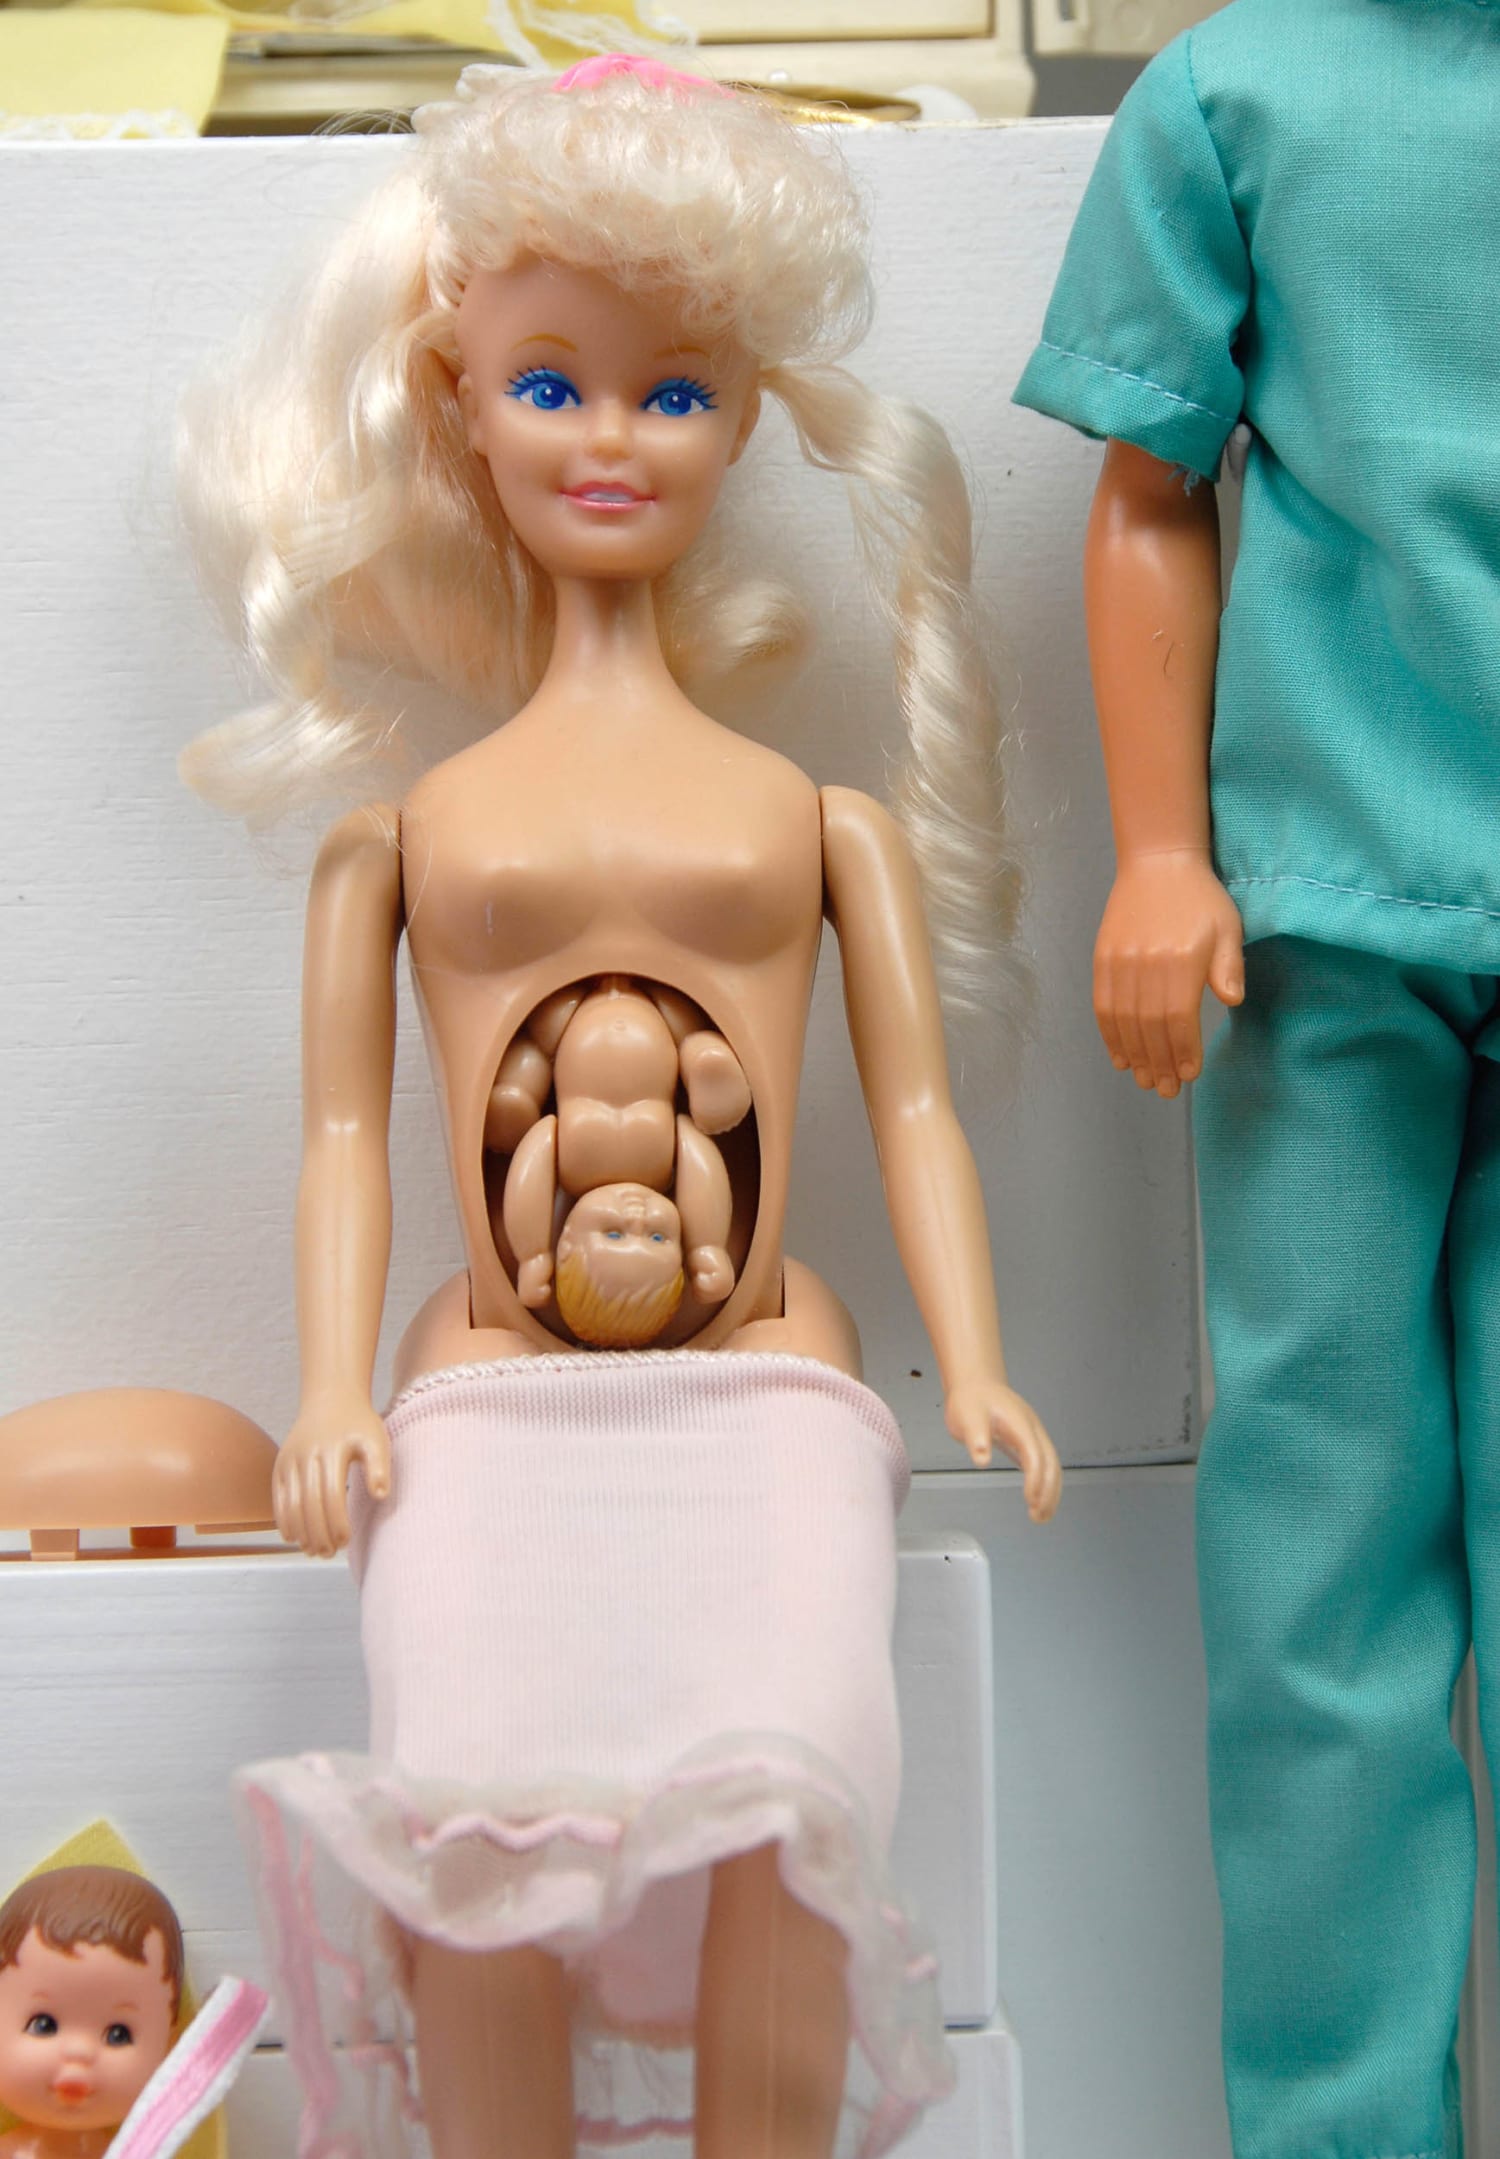 All About Midge: The Pregnant Barbie And Her Husband Allan